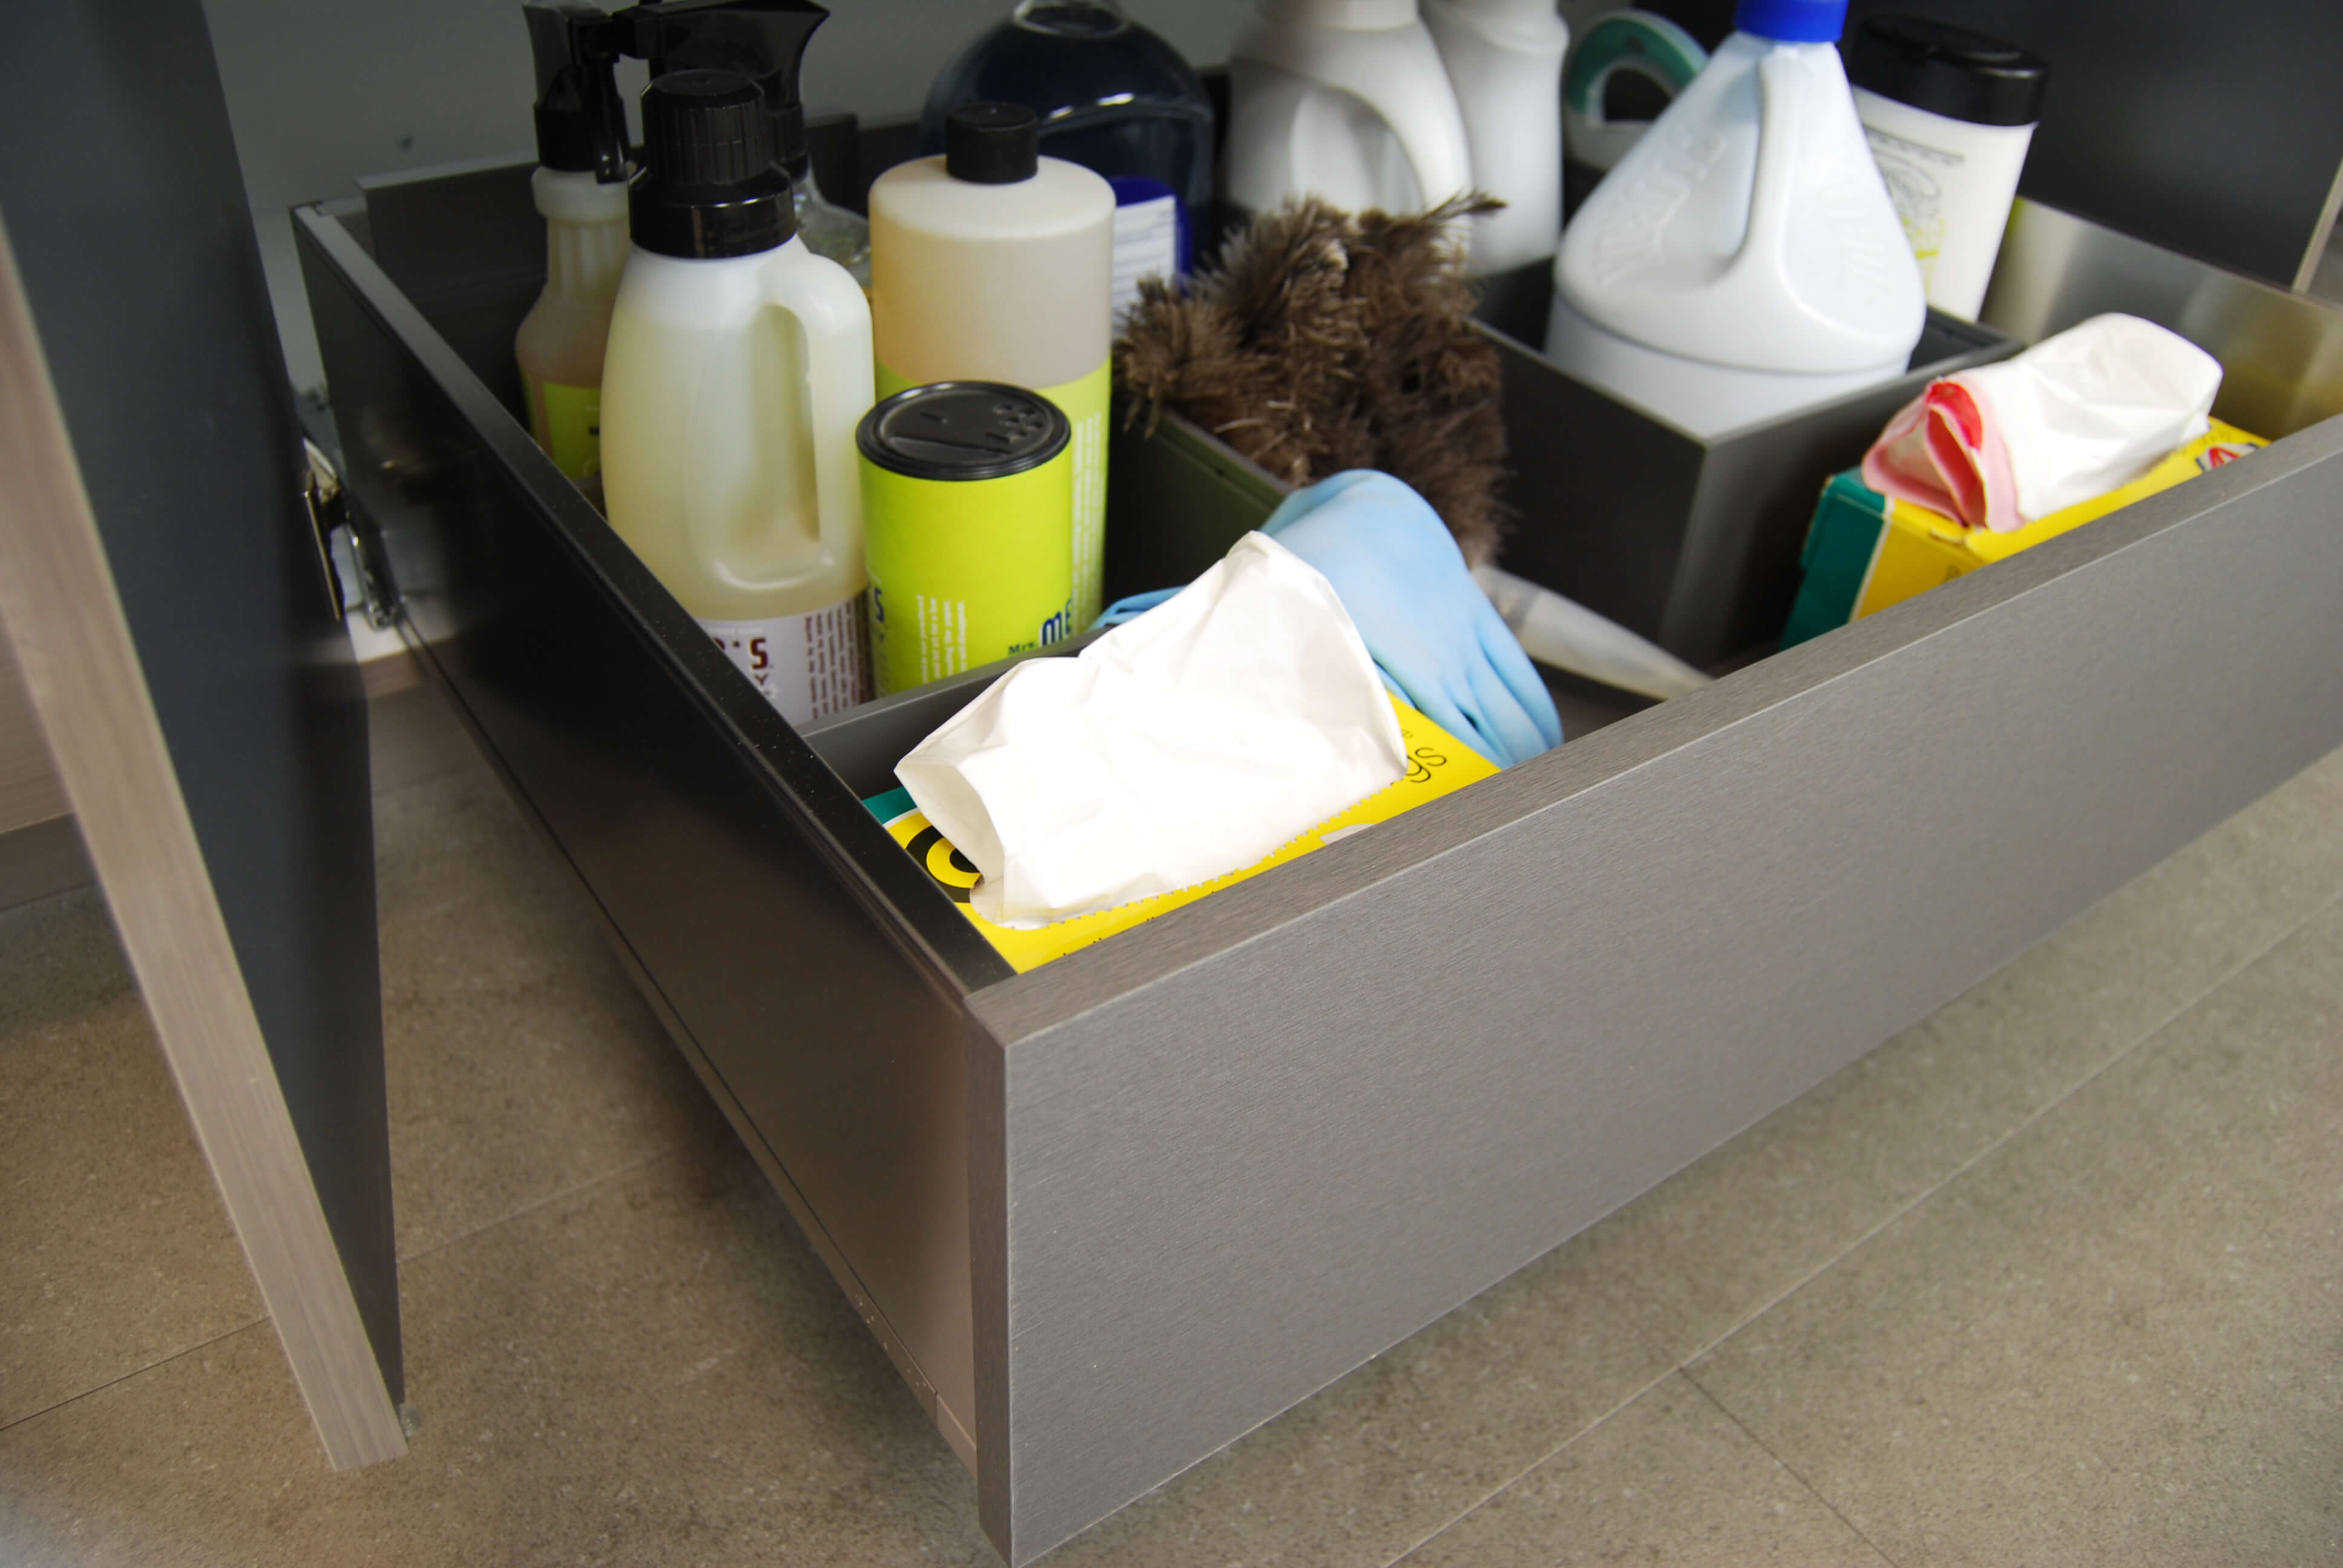 Kitchen cabinet Roll-Out shelves are shown in the Stainless Steel option and used for storing cleaning supplies under the sink in this example.